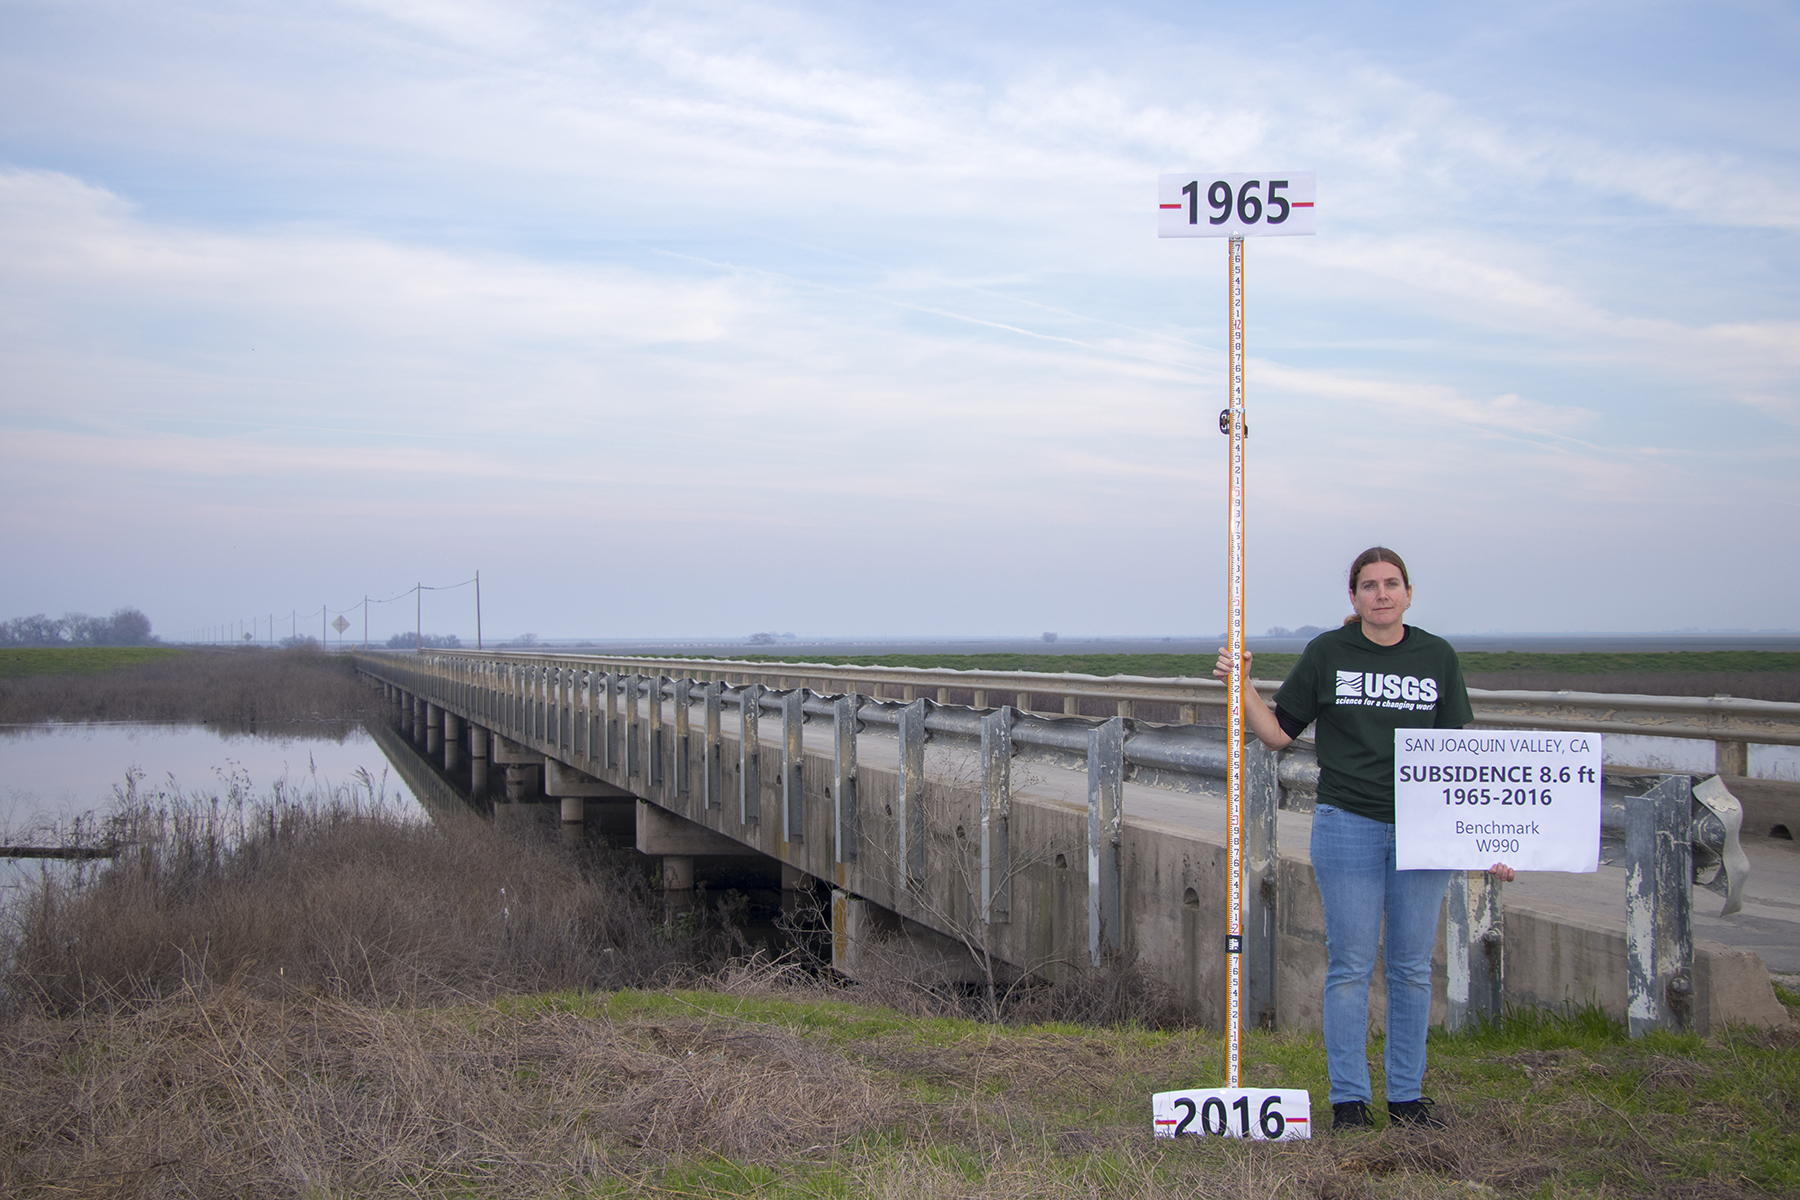 WOMAN IN USGS TOP SHOWING SUBSIDENCE LEVELS WITH MEASURING STICK